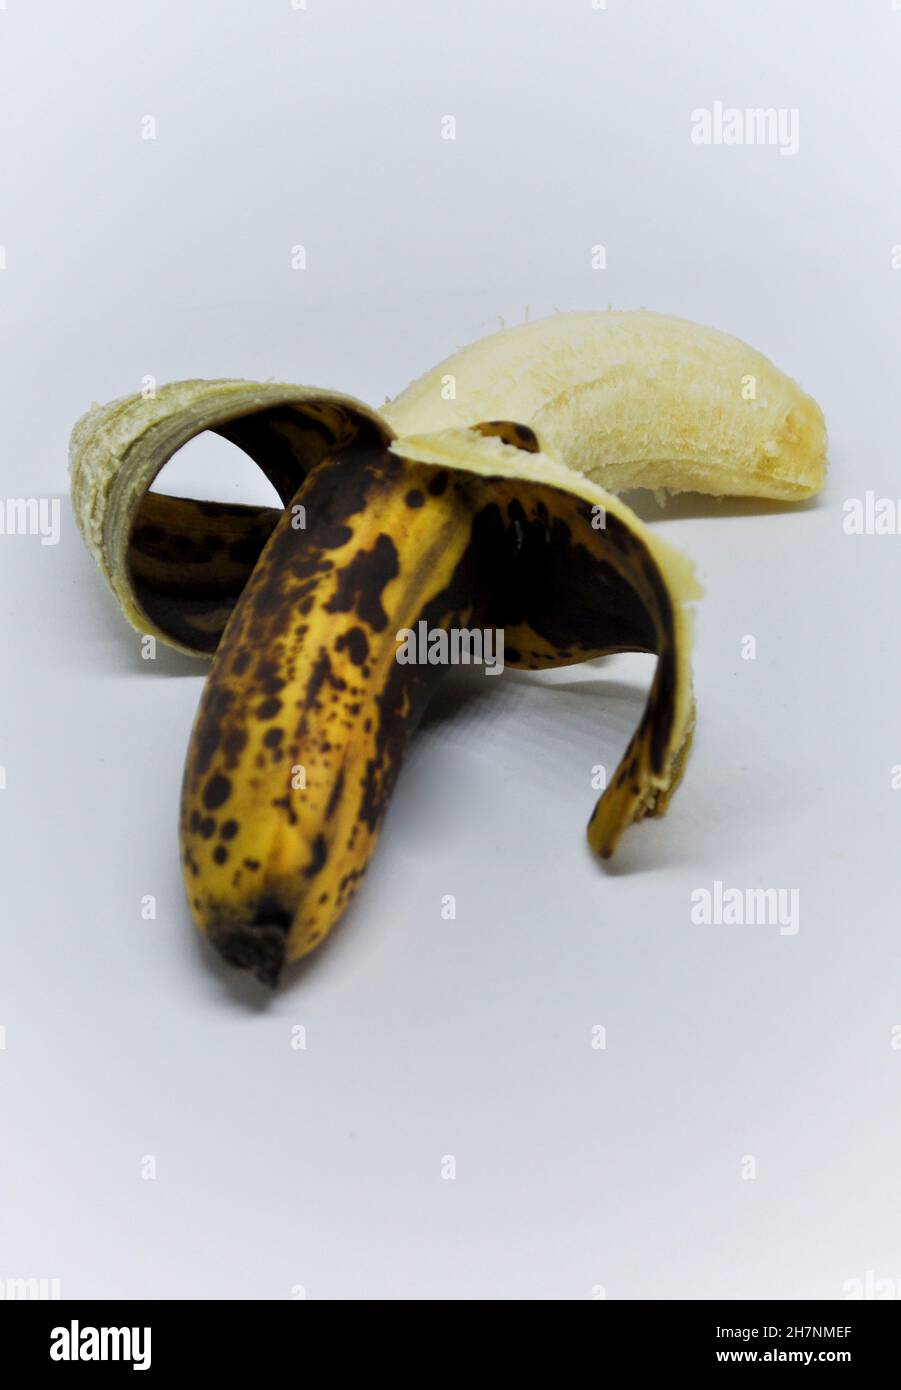 Cut out image of an over ripe banana which is half peeled set against a white background Stock Photo